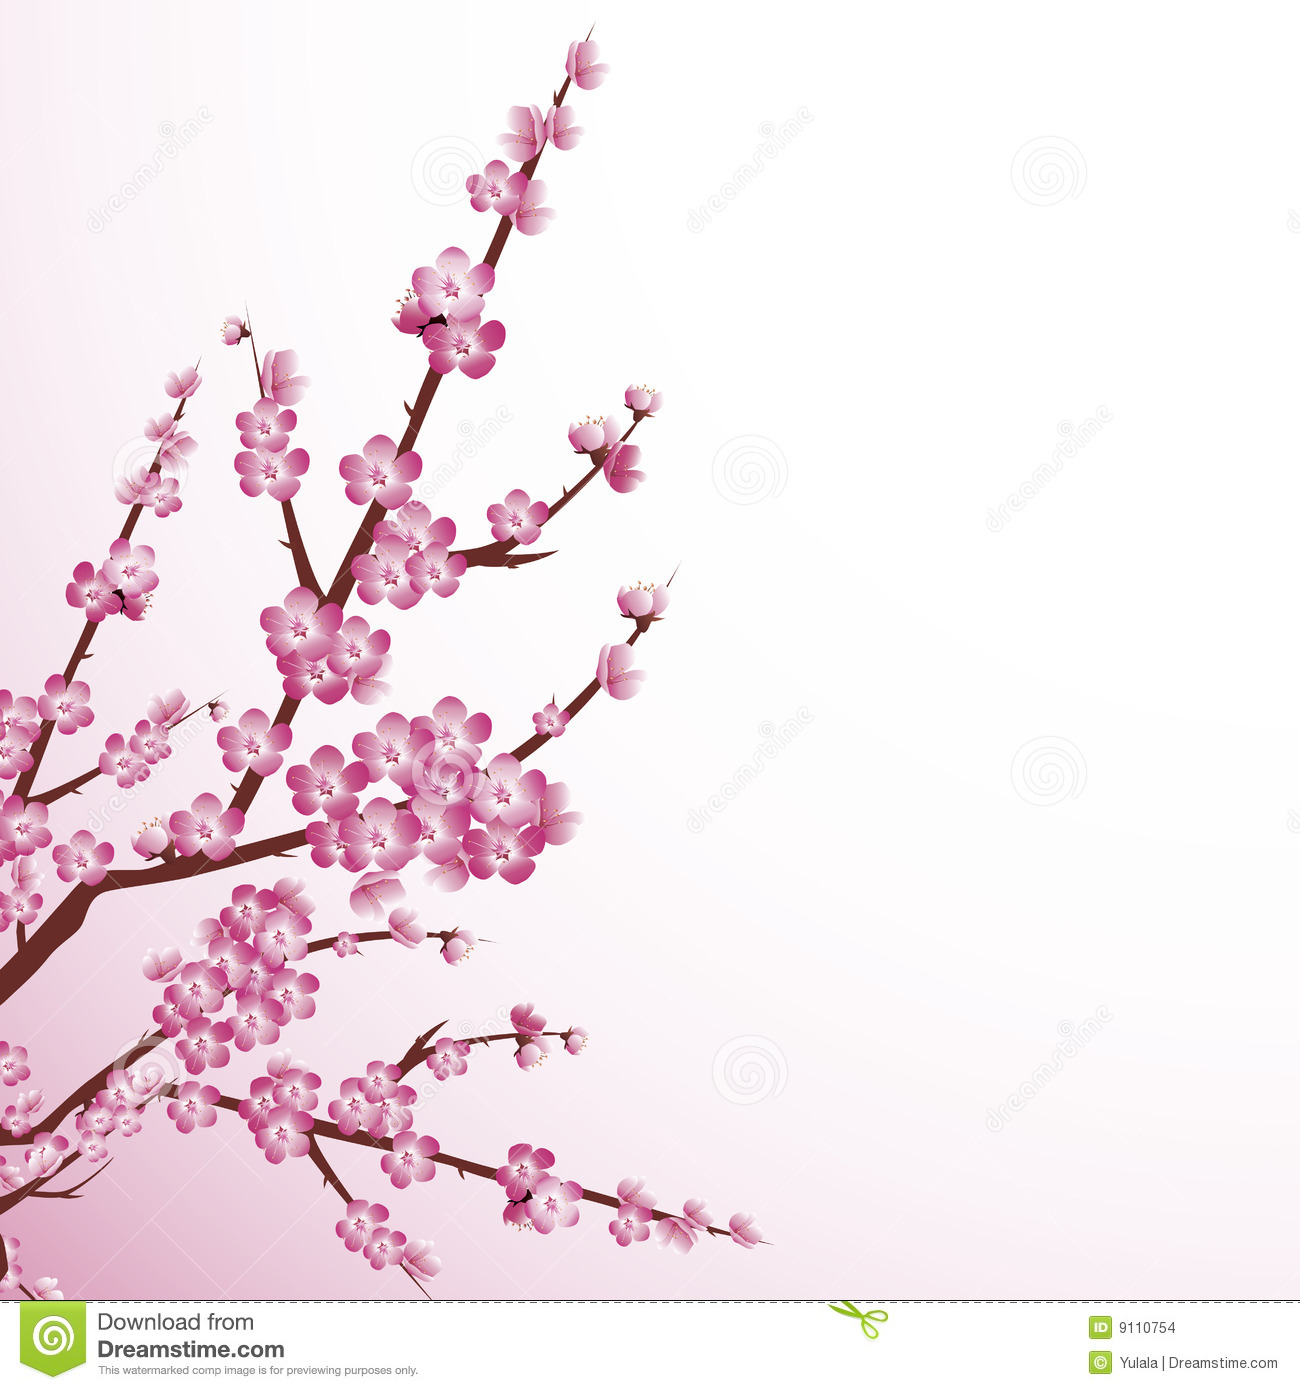 Beautiful Cherry Tree Blossoms Against White Background